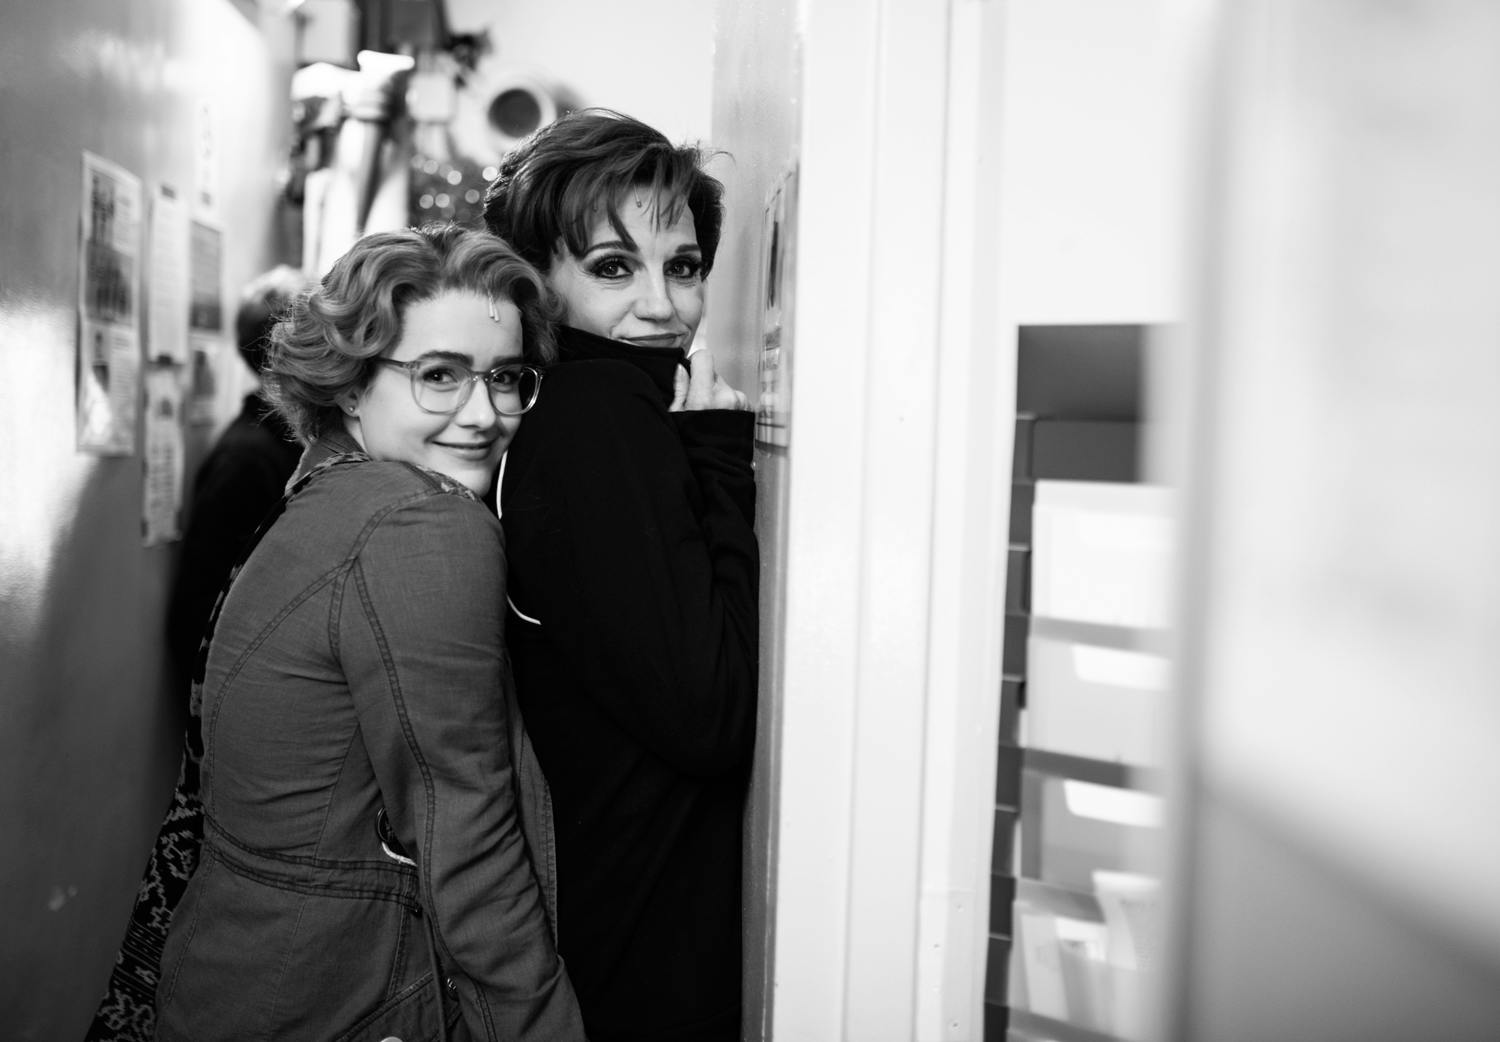 Caitlin Kinnunen- Beth Leavel- The Prom Musical Broadway-Backstage-Jenny Anderson Photo-BroadwayBox